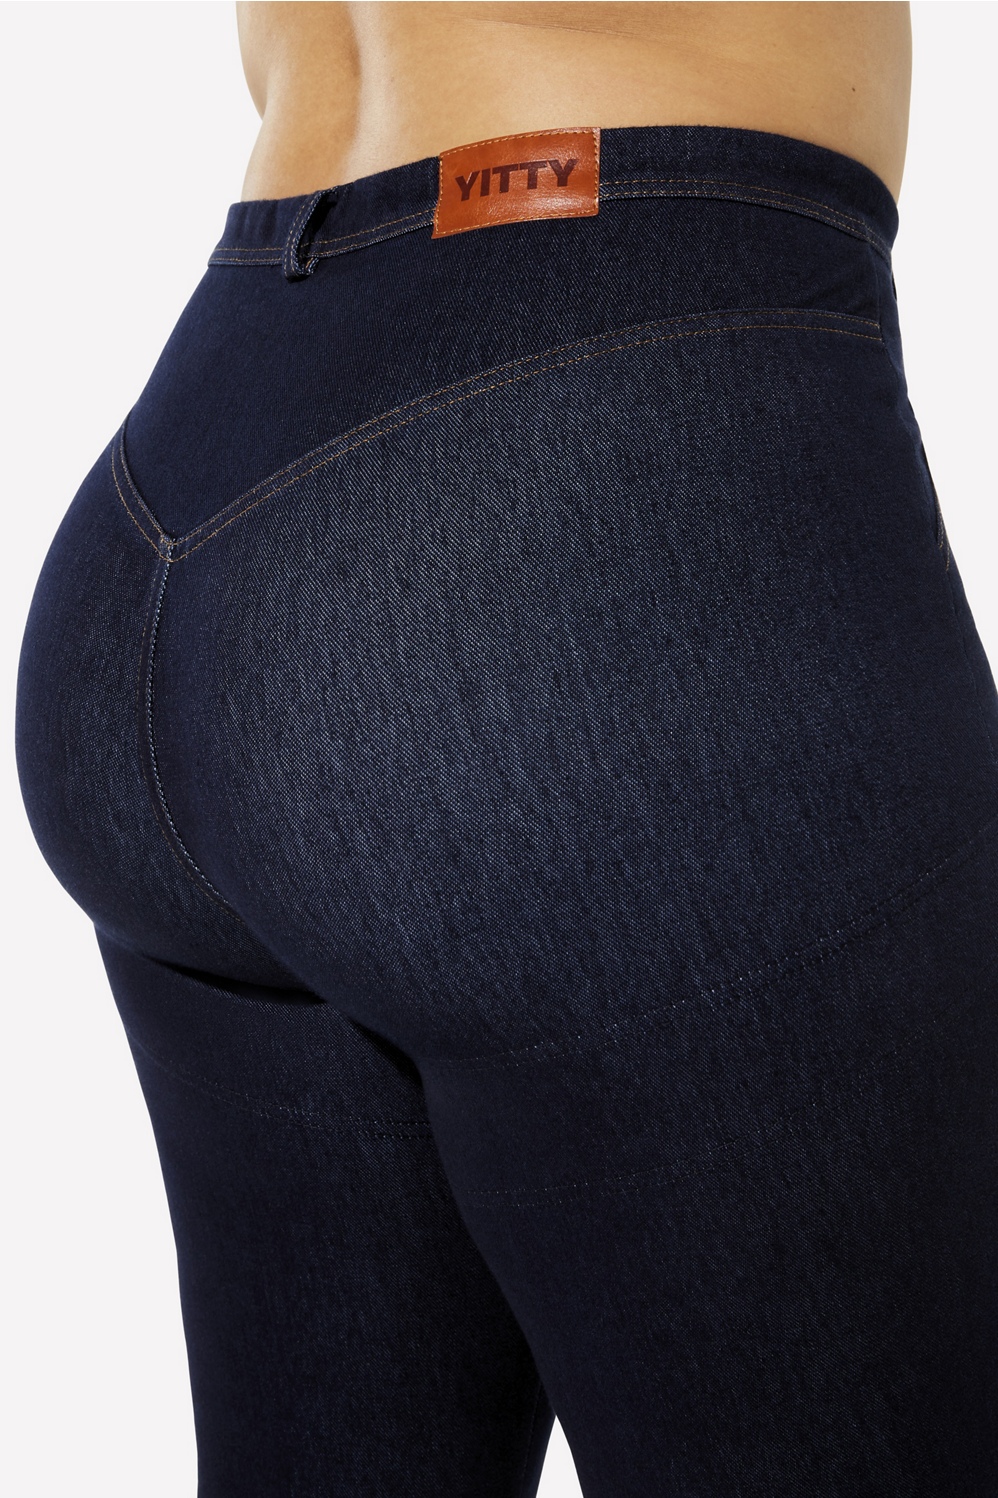 Denim Is Served Smoothing Jean Yitty Stretch 